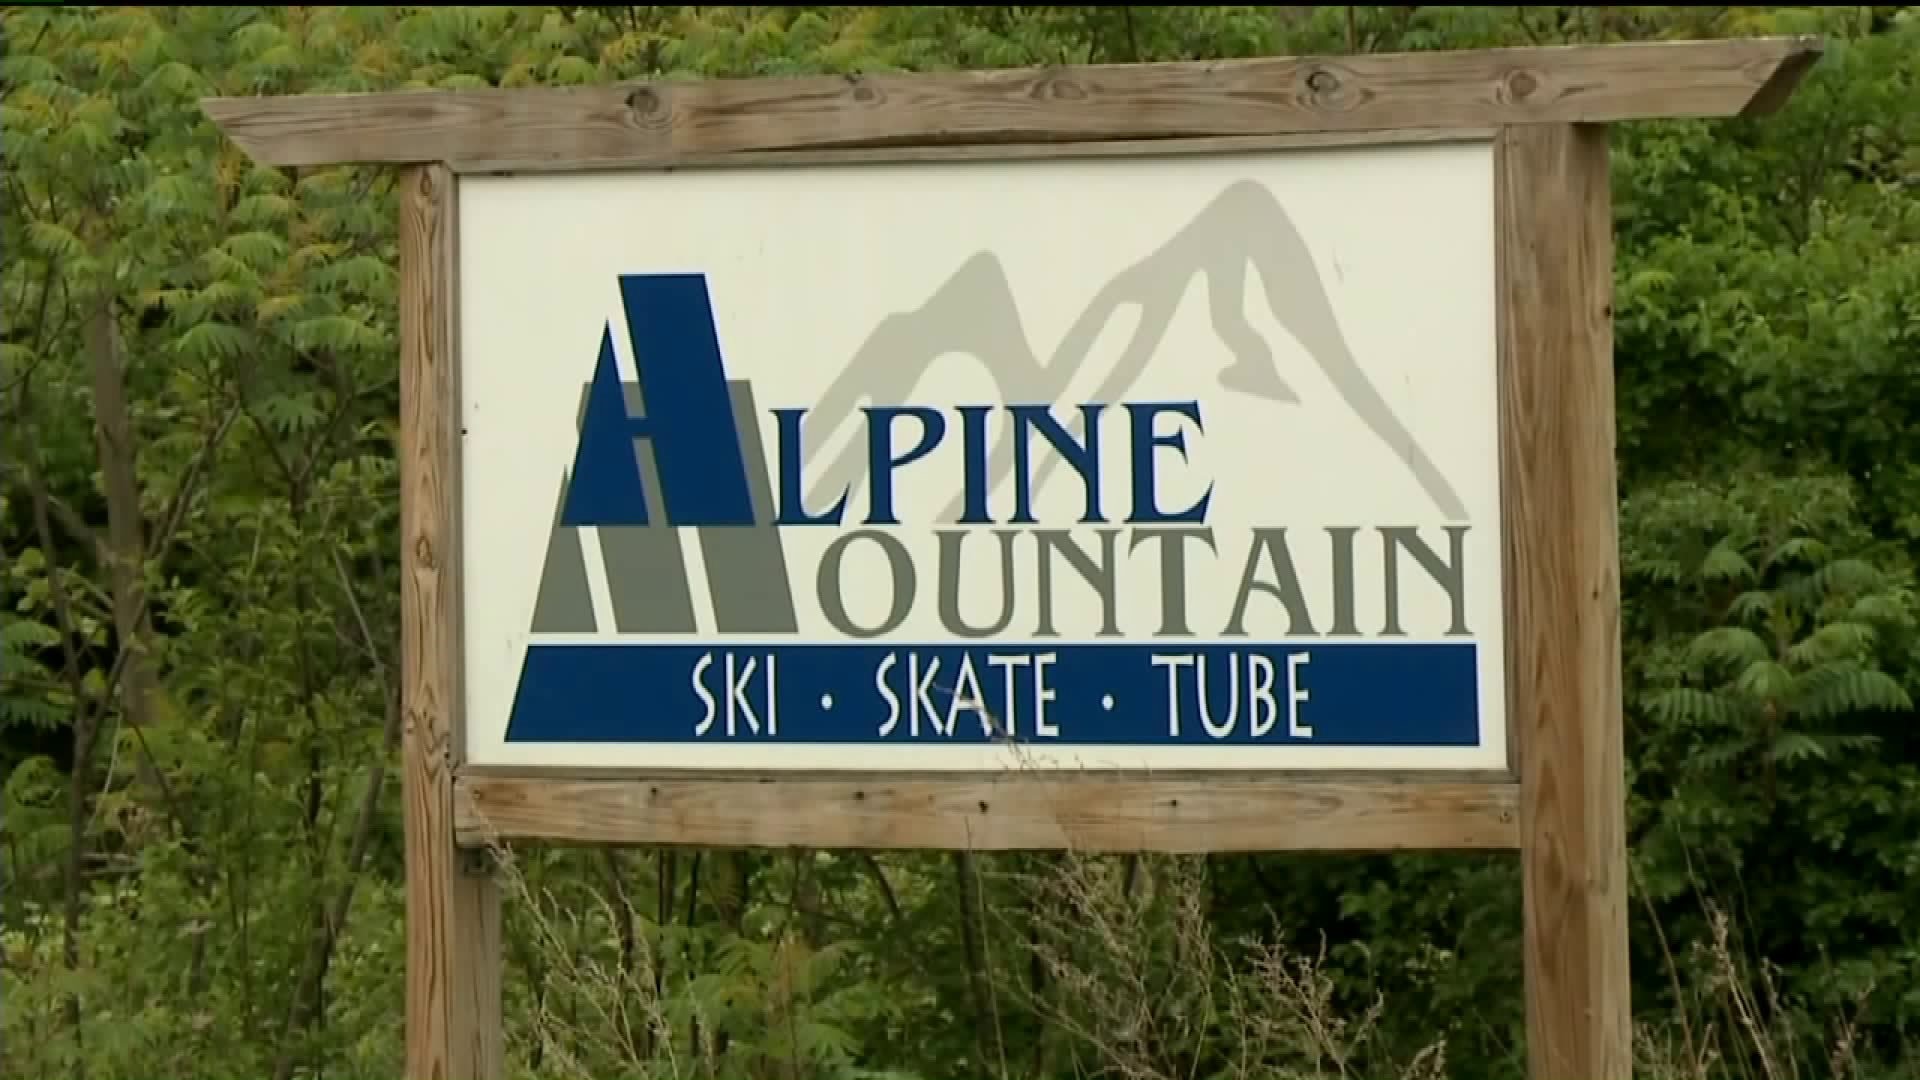 Closed Ski Resort in the Poconos Gets New Owners